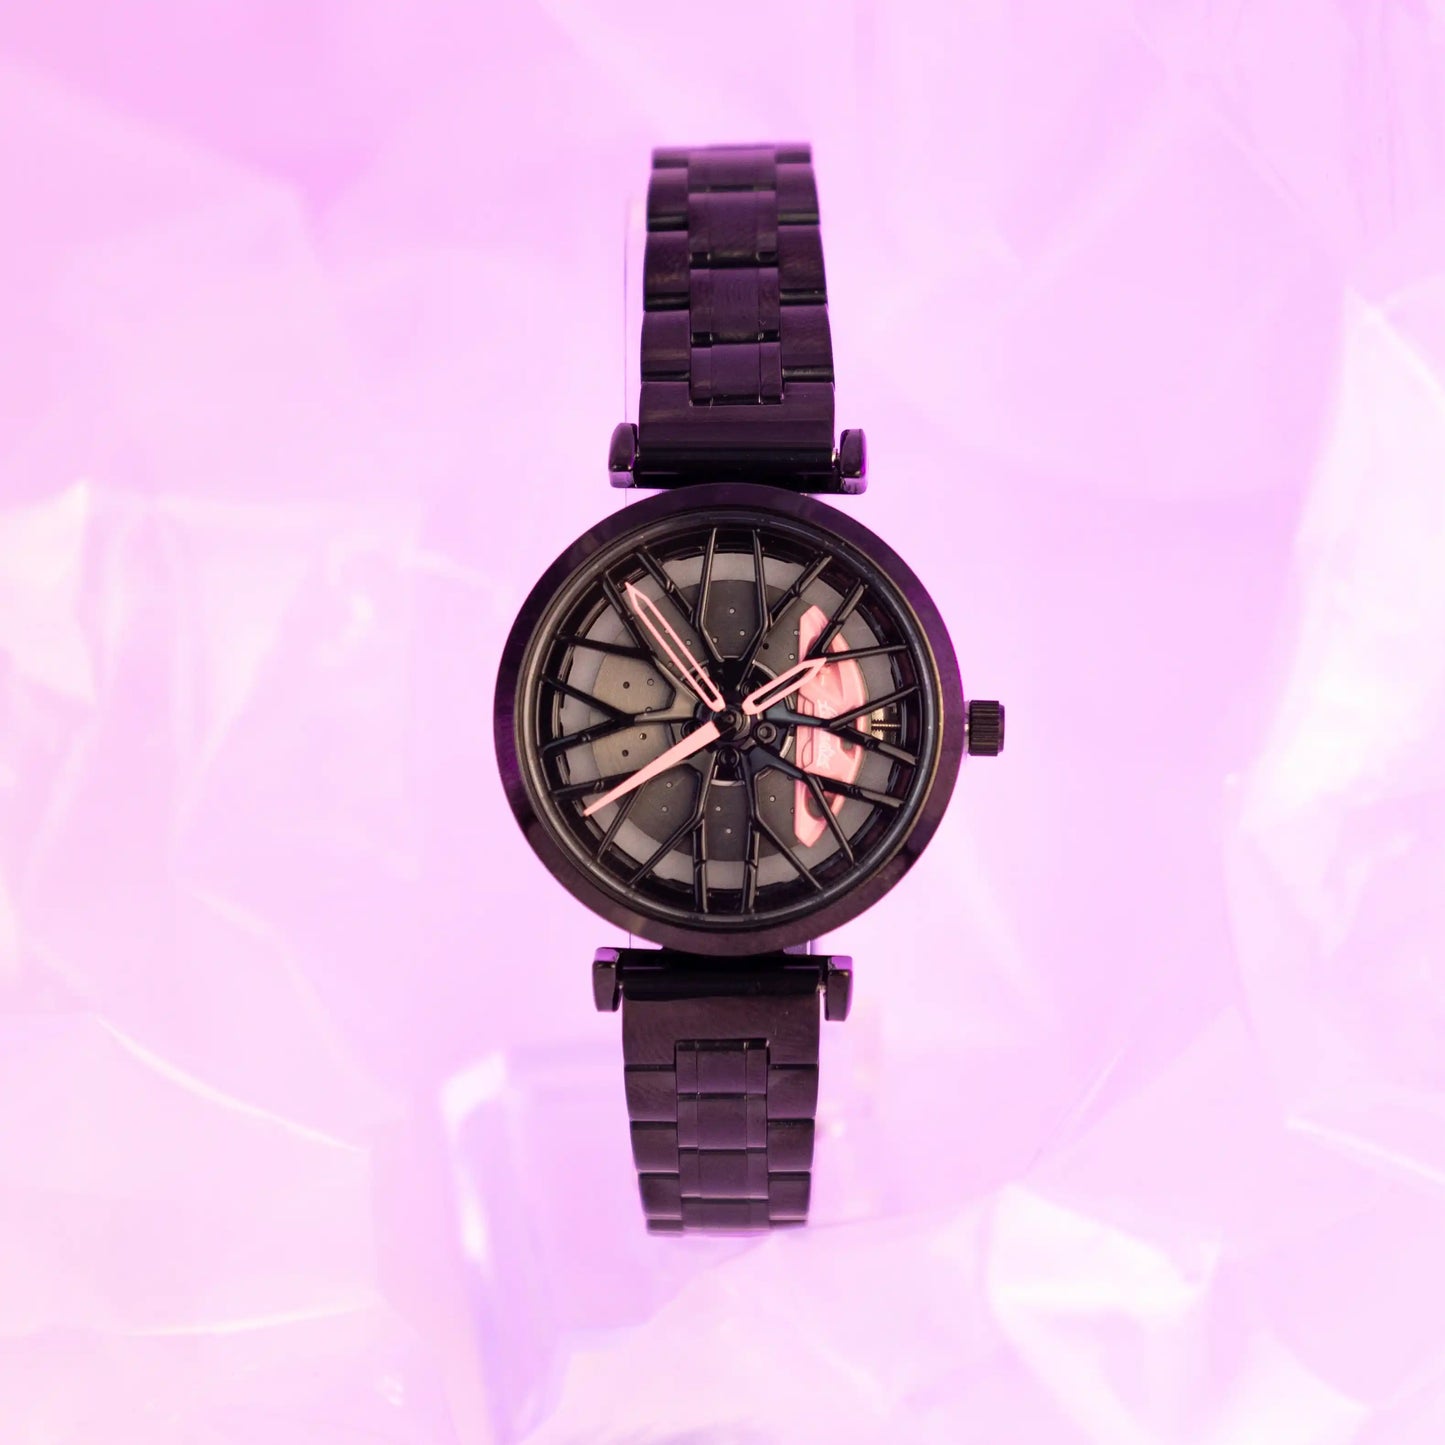 This image showcases the DriftElement Lady Like Edition watch. A women's timepiece featuring a motorsport-inspired rim design. The watch has a black metallic bracelet and casing, with striking pink accents on the watch hands and markers, highlighting its innovative design. The dial mimics the intricate pattern of a car's rim, blending automotive passion with timekeeping elegance. Created by a young startup from Germany, DriftElement is known for its fusion of horological craftsmanship and automotive design.